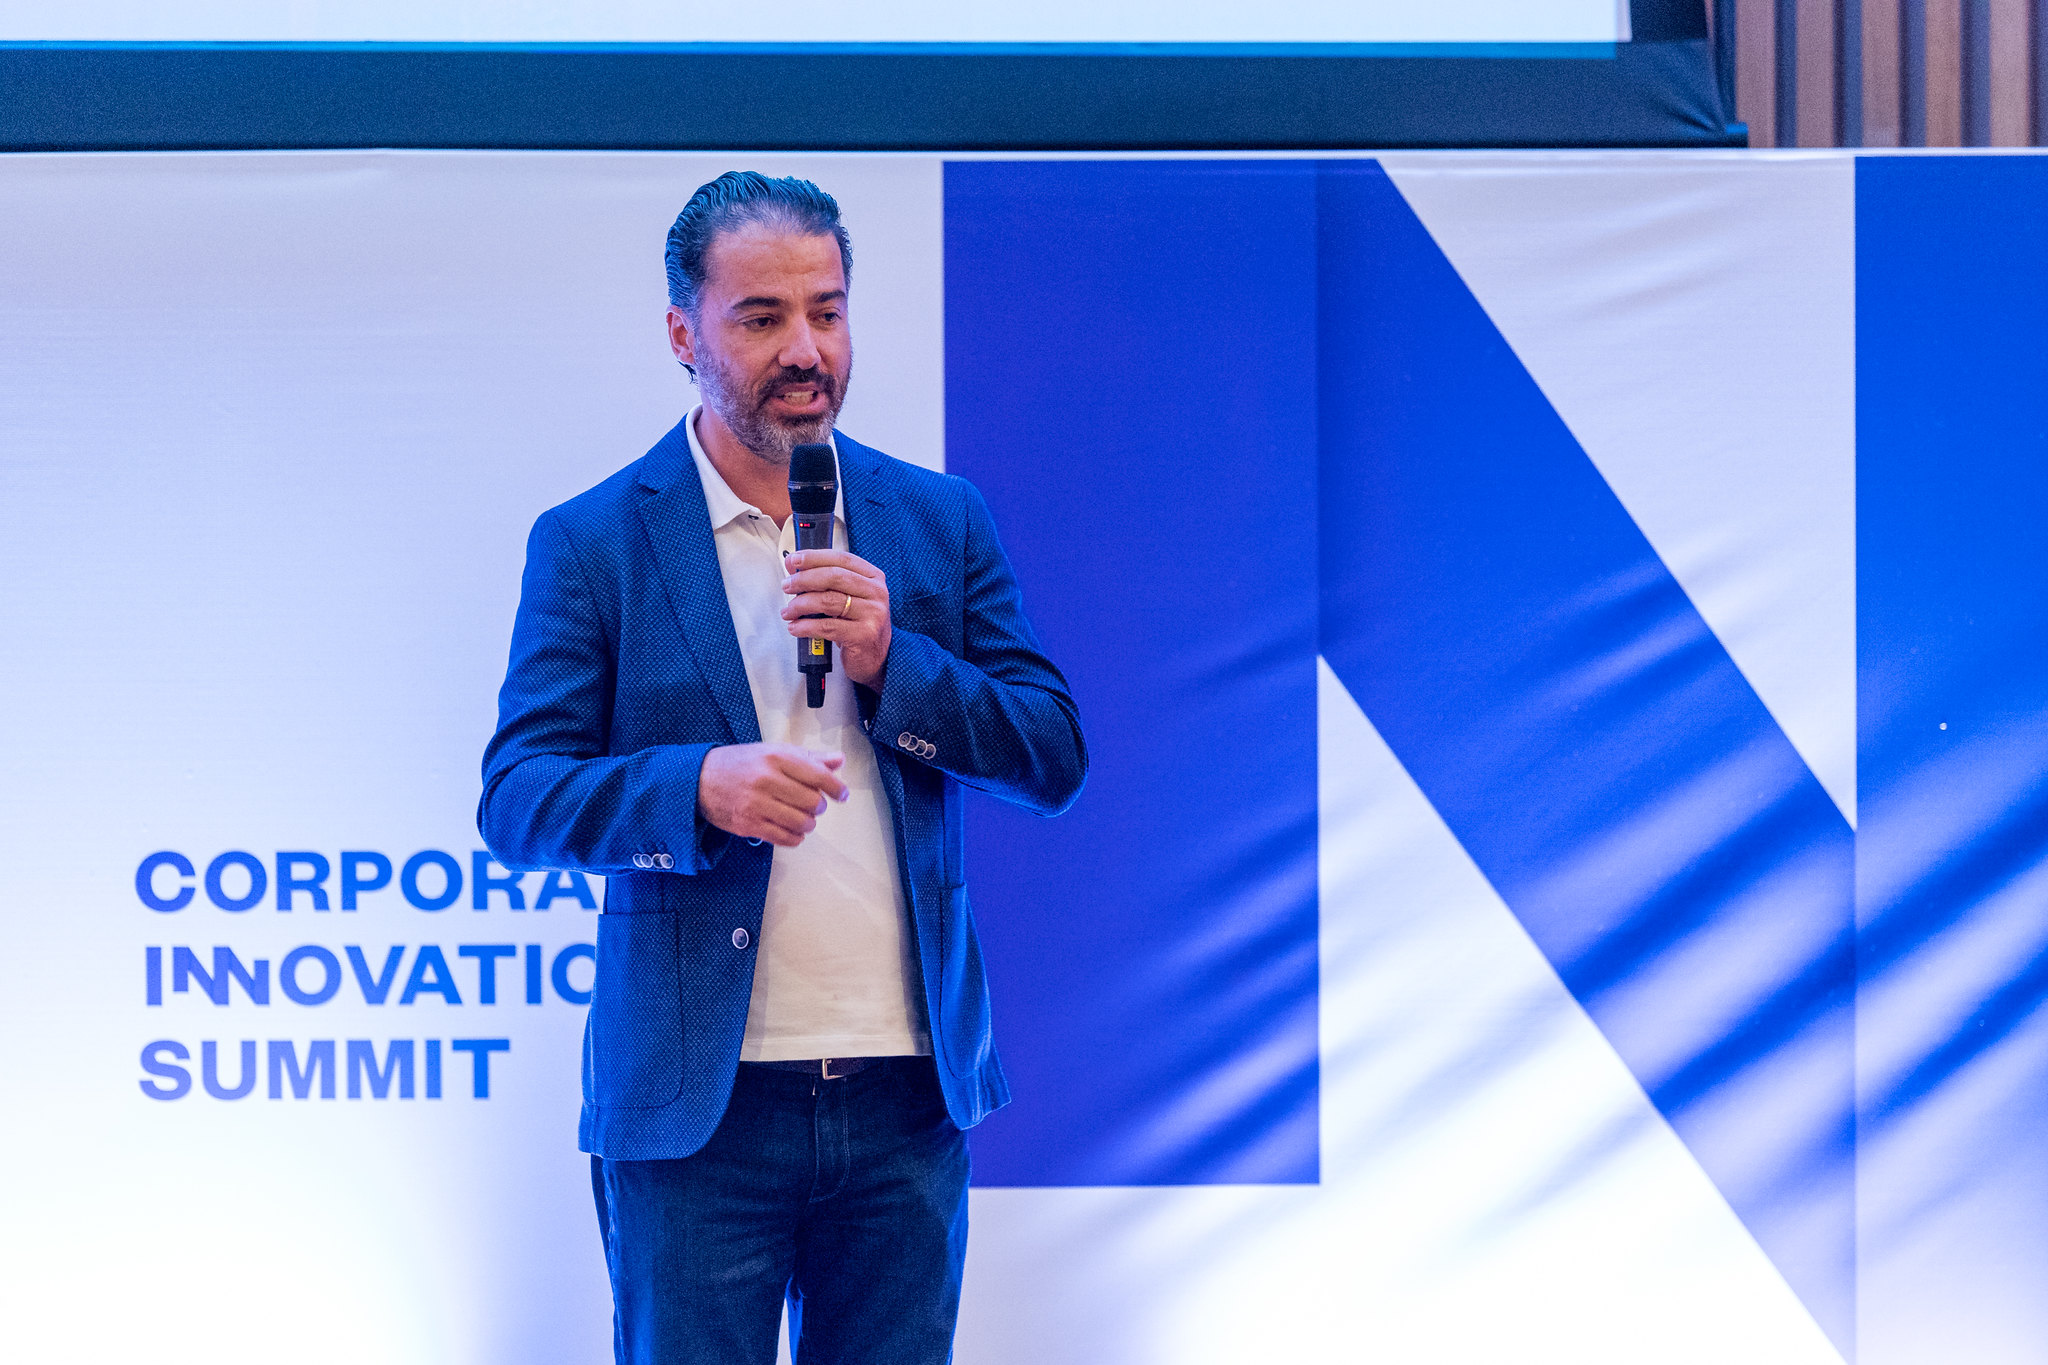 A person stands in front of a wall that reads 'Corporate Innovation Summit'. They're holding a microphone in their left hand and are gesturing with their right. They appear to be speaking.